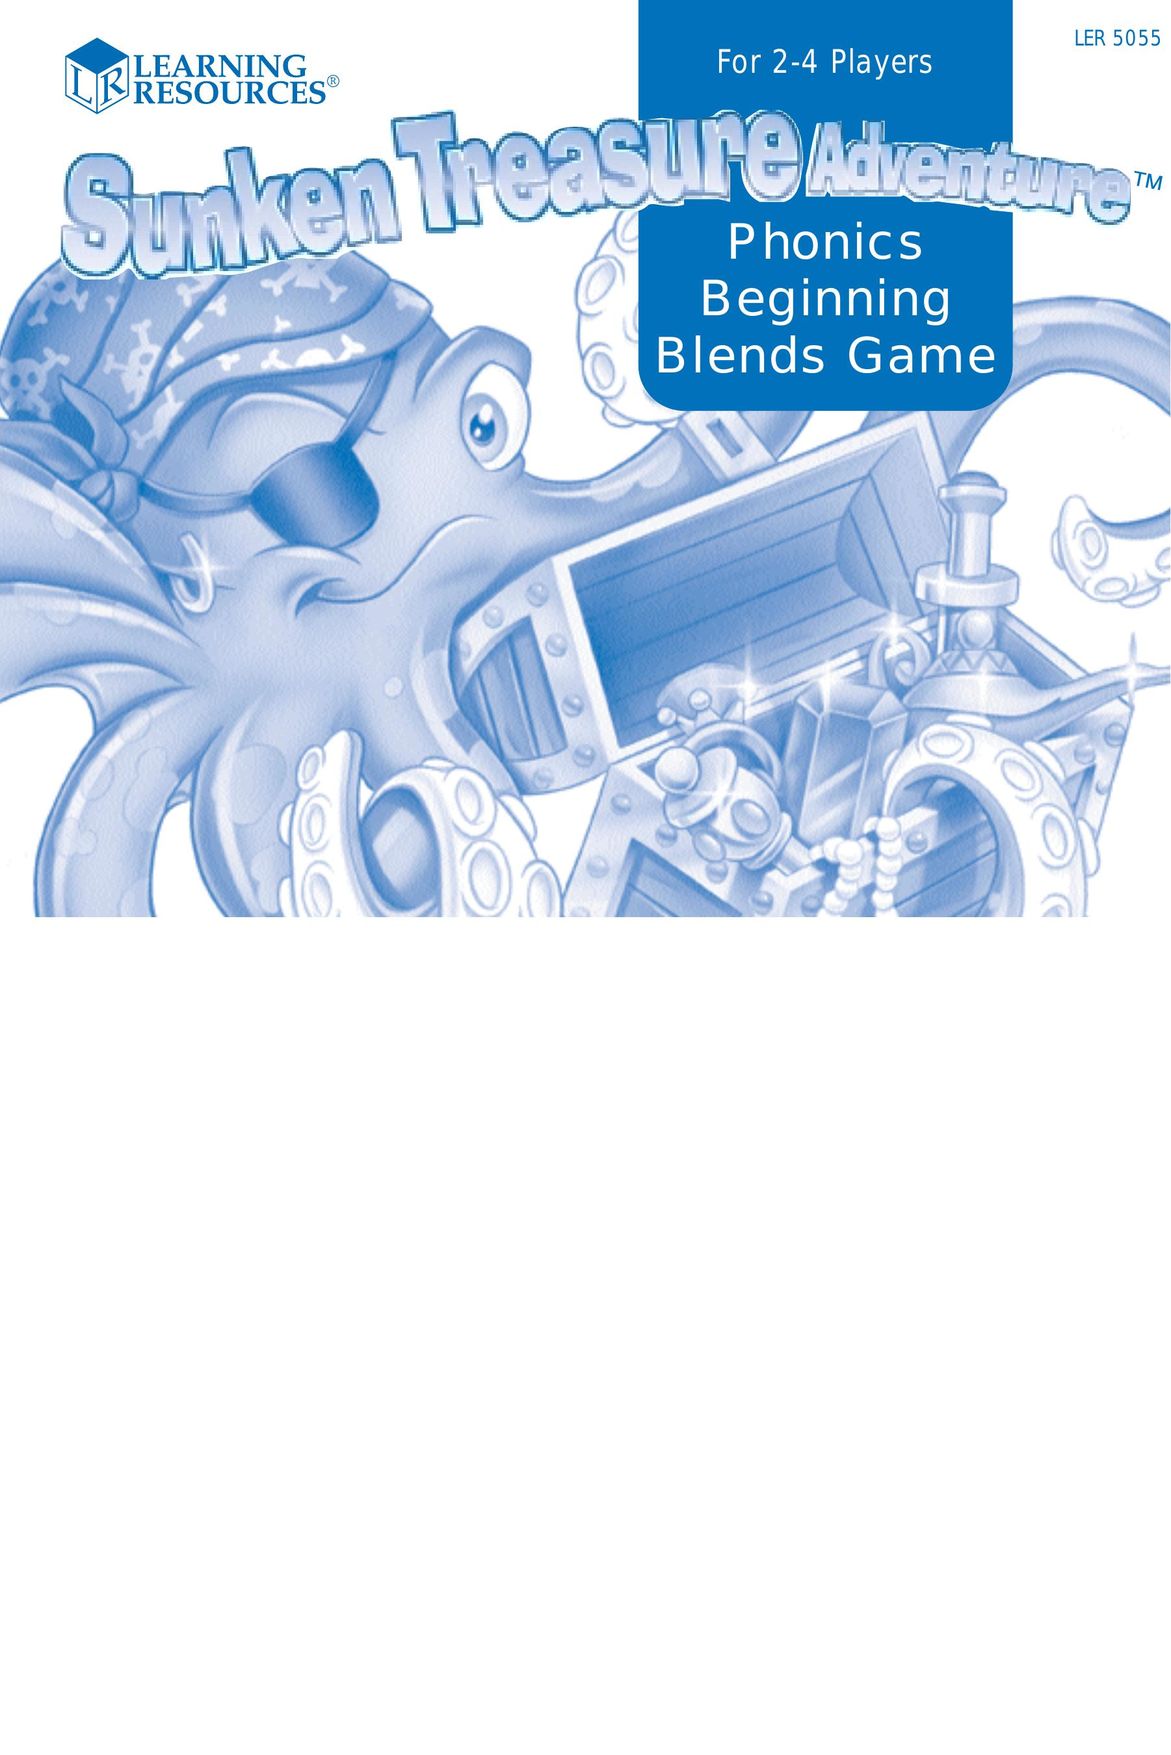 Learning Resources LER 5055 Games User Manual